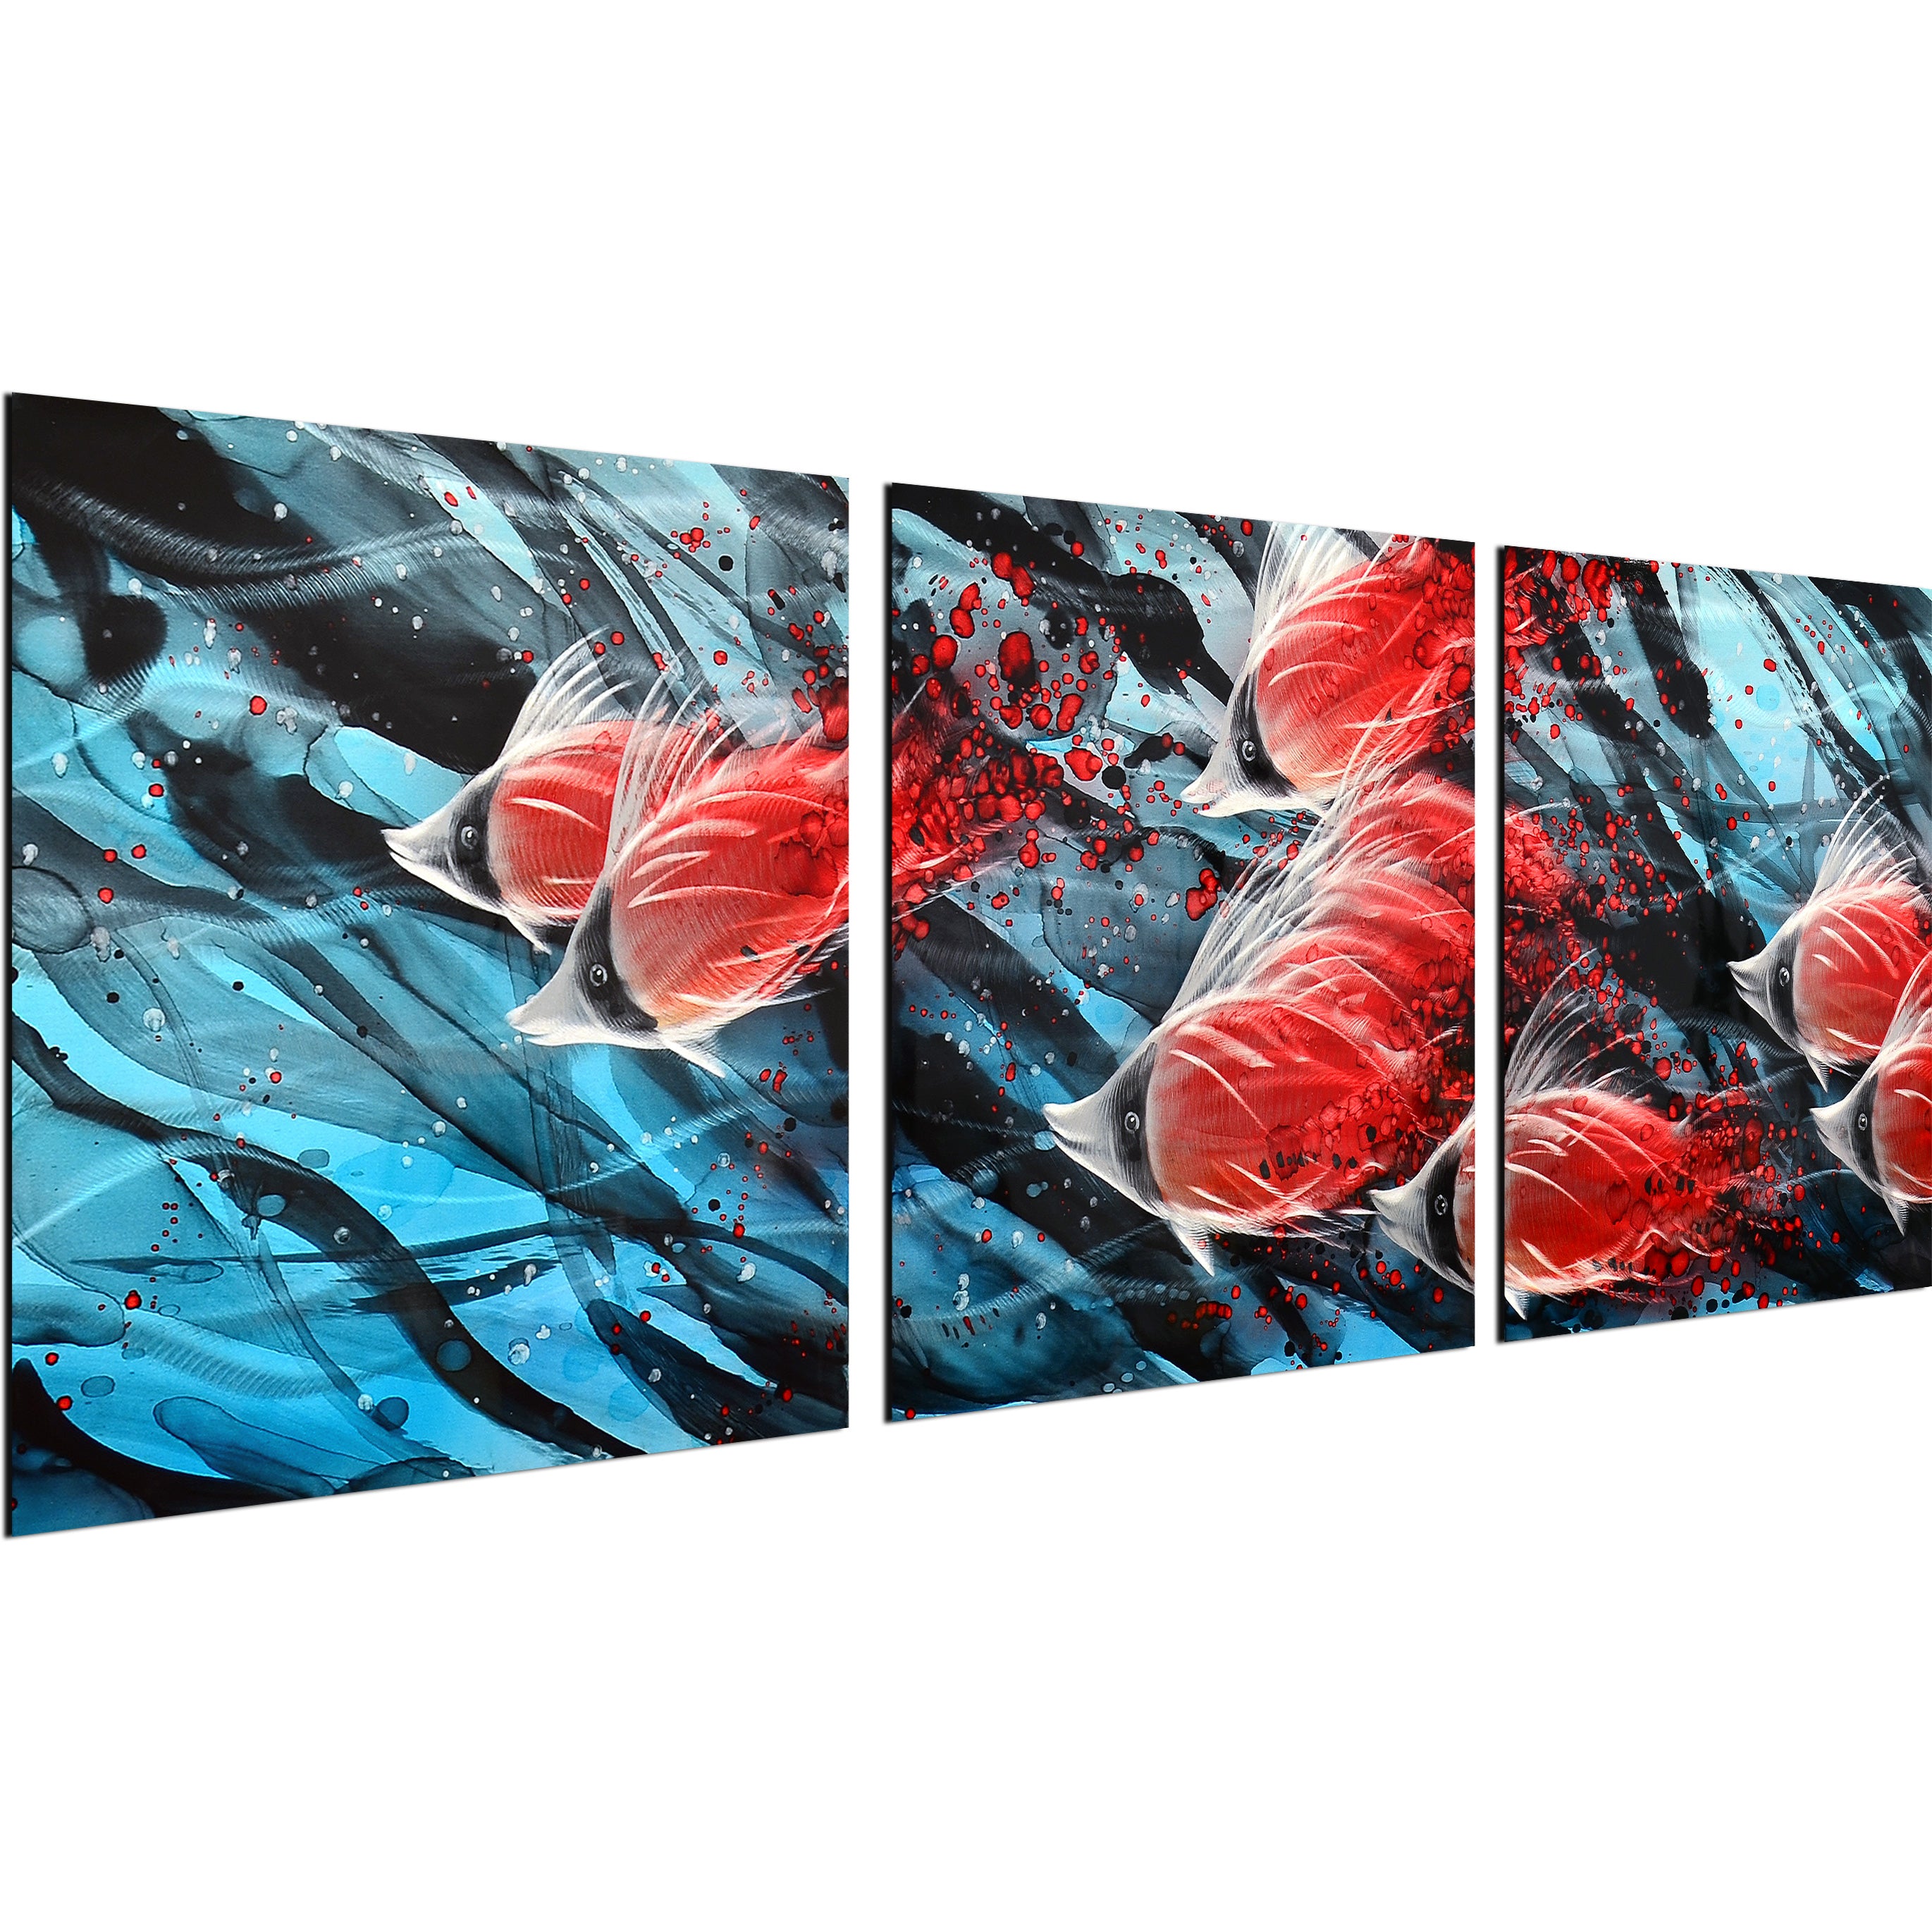 Colorful formation of fish 3 Piece Handmade Metal Wall Art